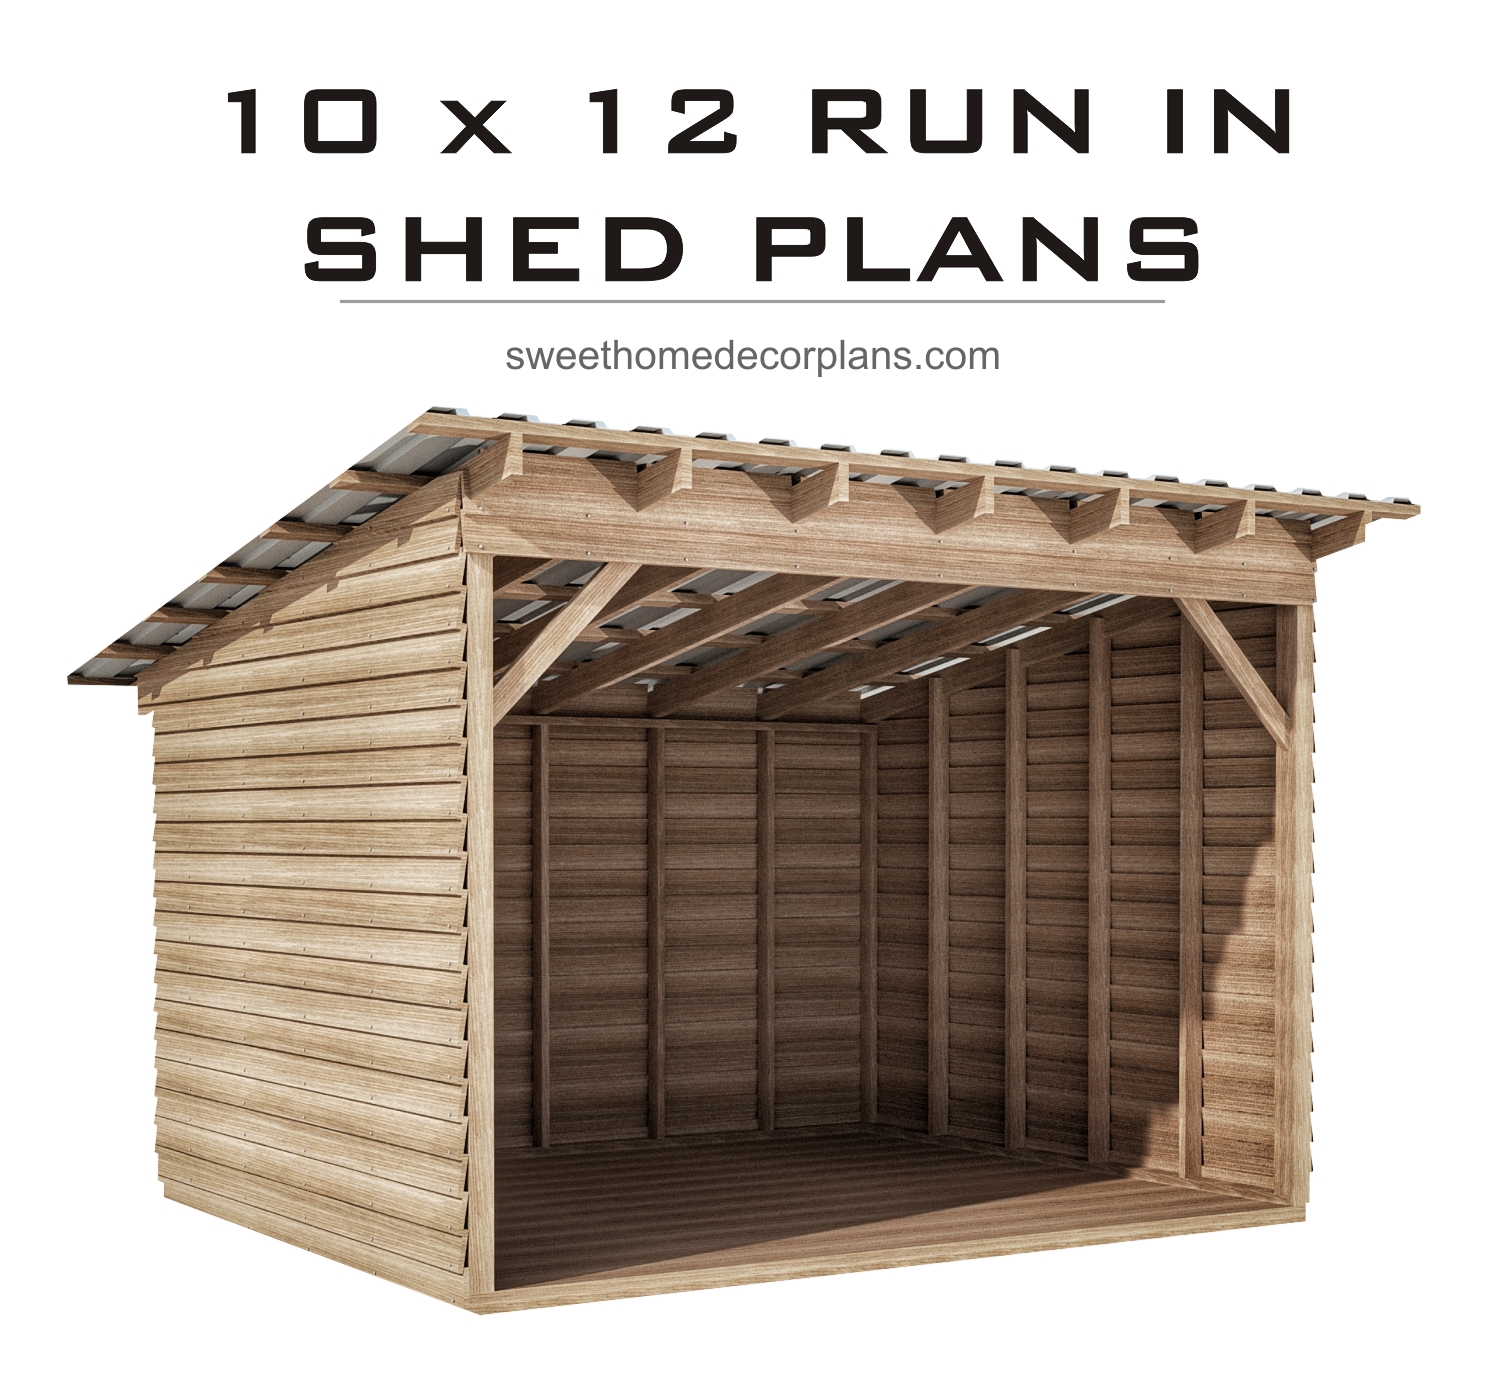 Wooden-10-x-12-run-in-shed-plans-in-pdf-for-backyard